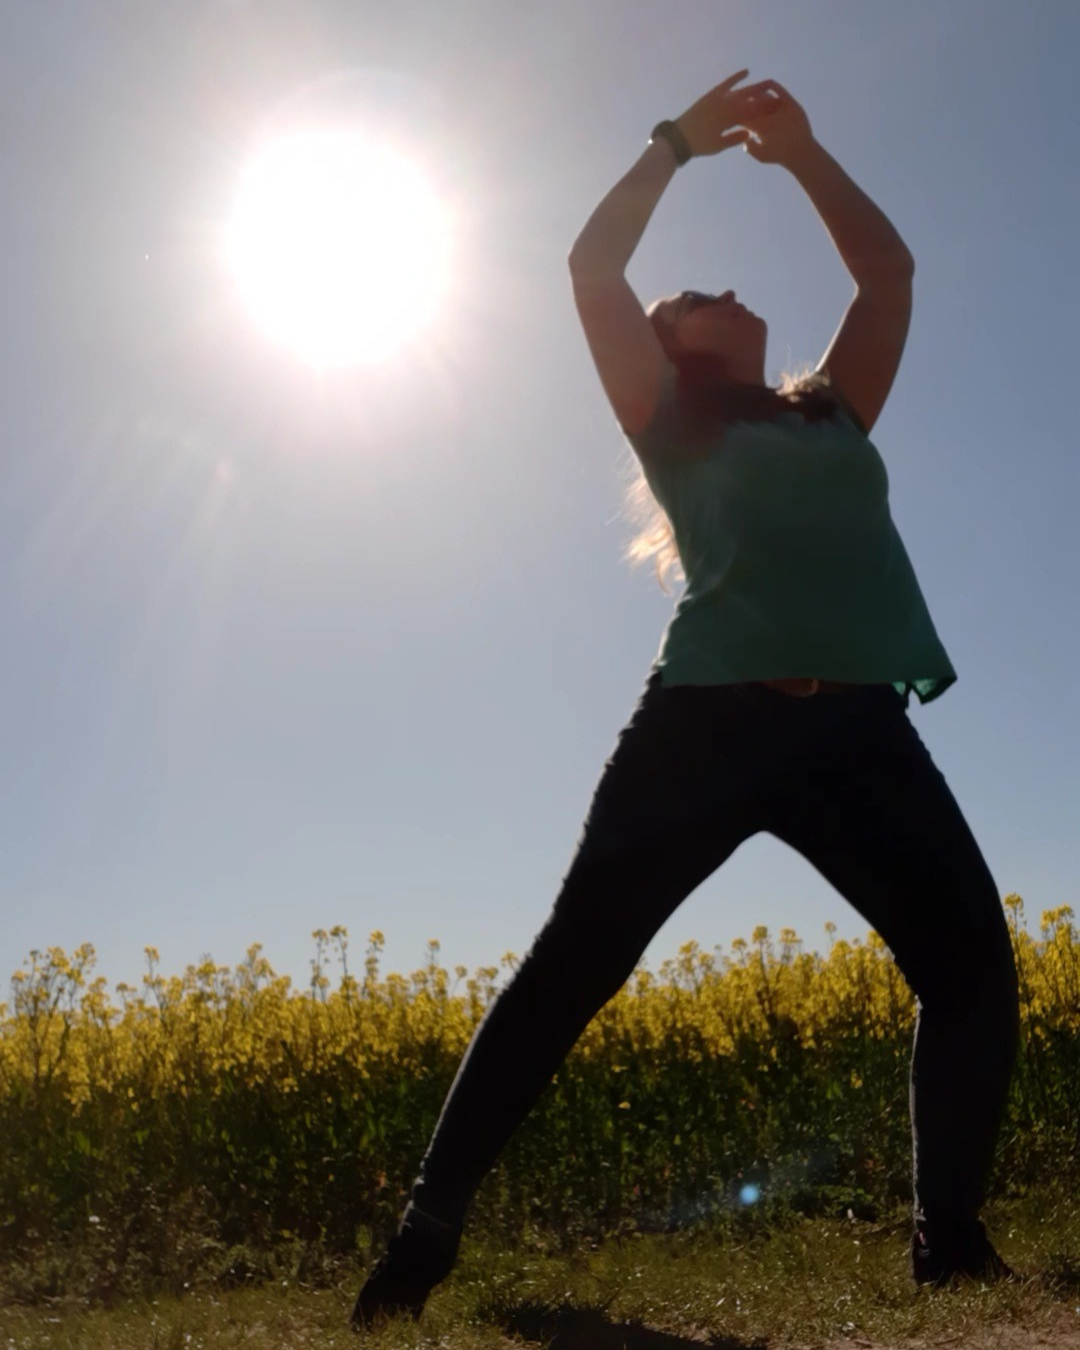 Sun shines brightly with dancing raising hands above head in circle.